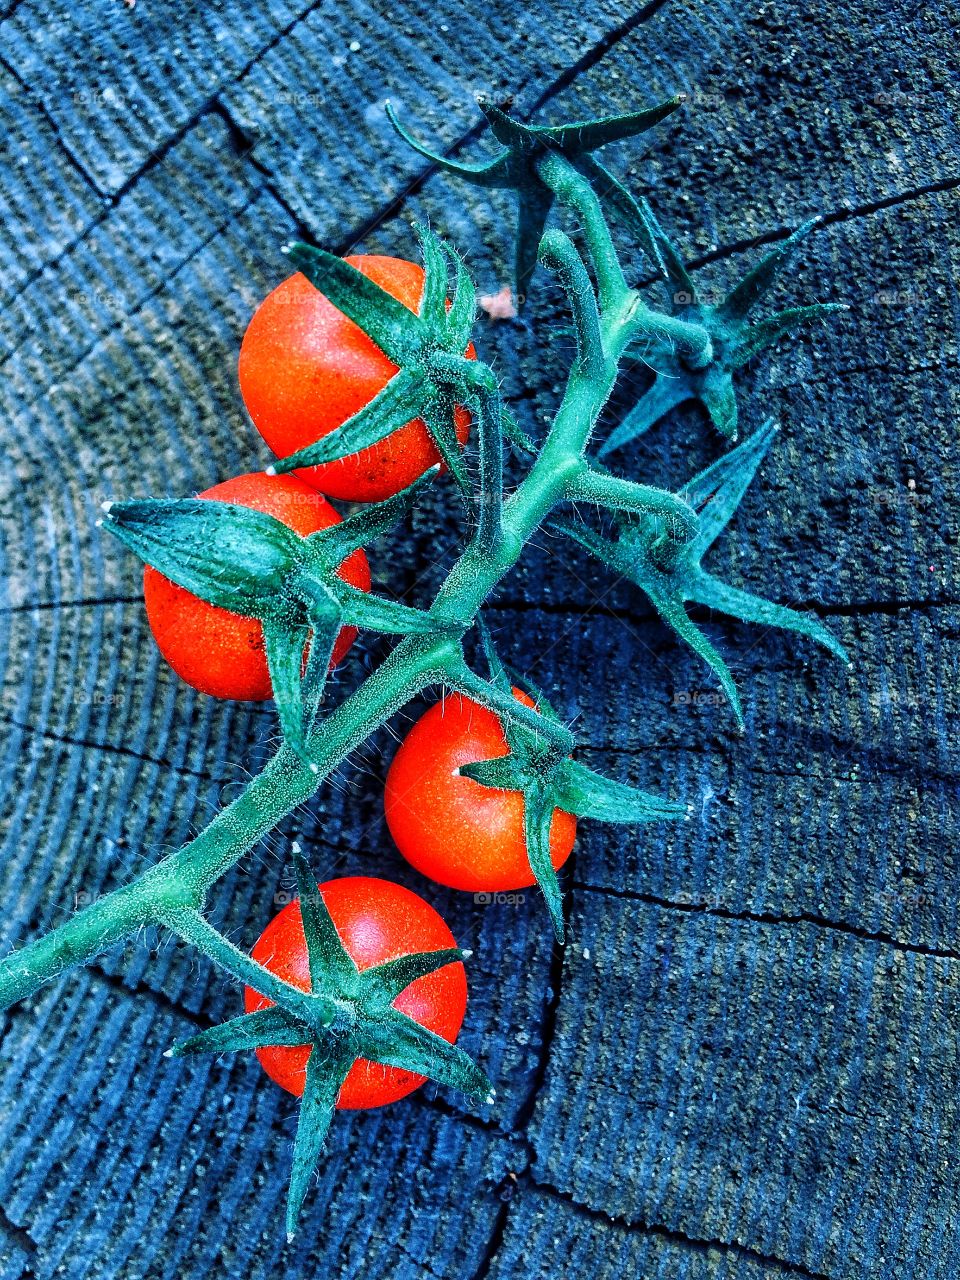 Red tomatoes background 